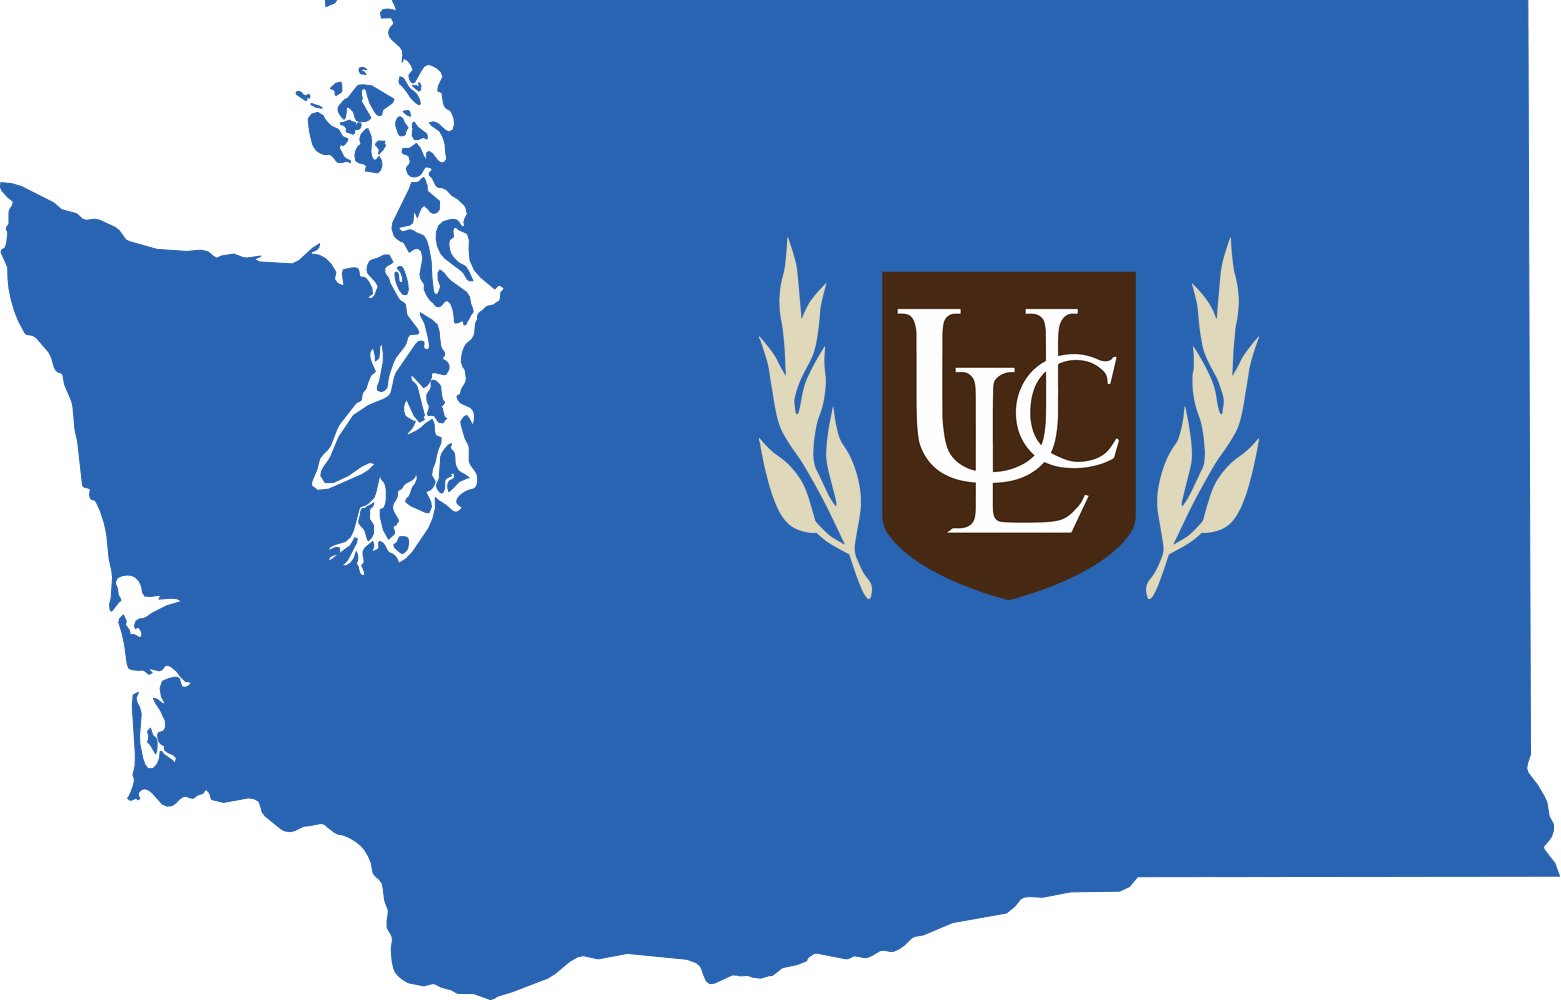 An outline of Washington with the ULC logo